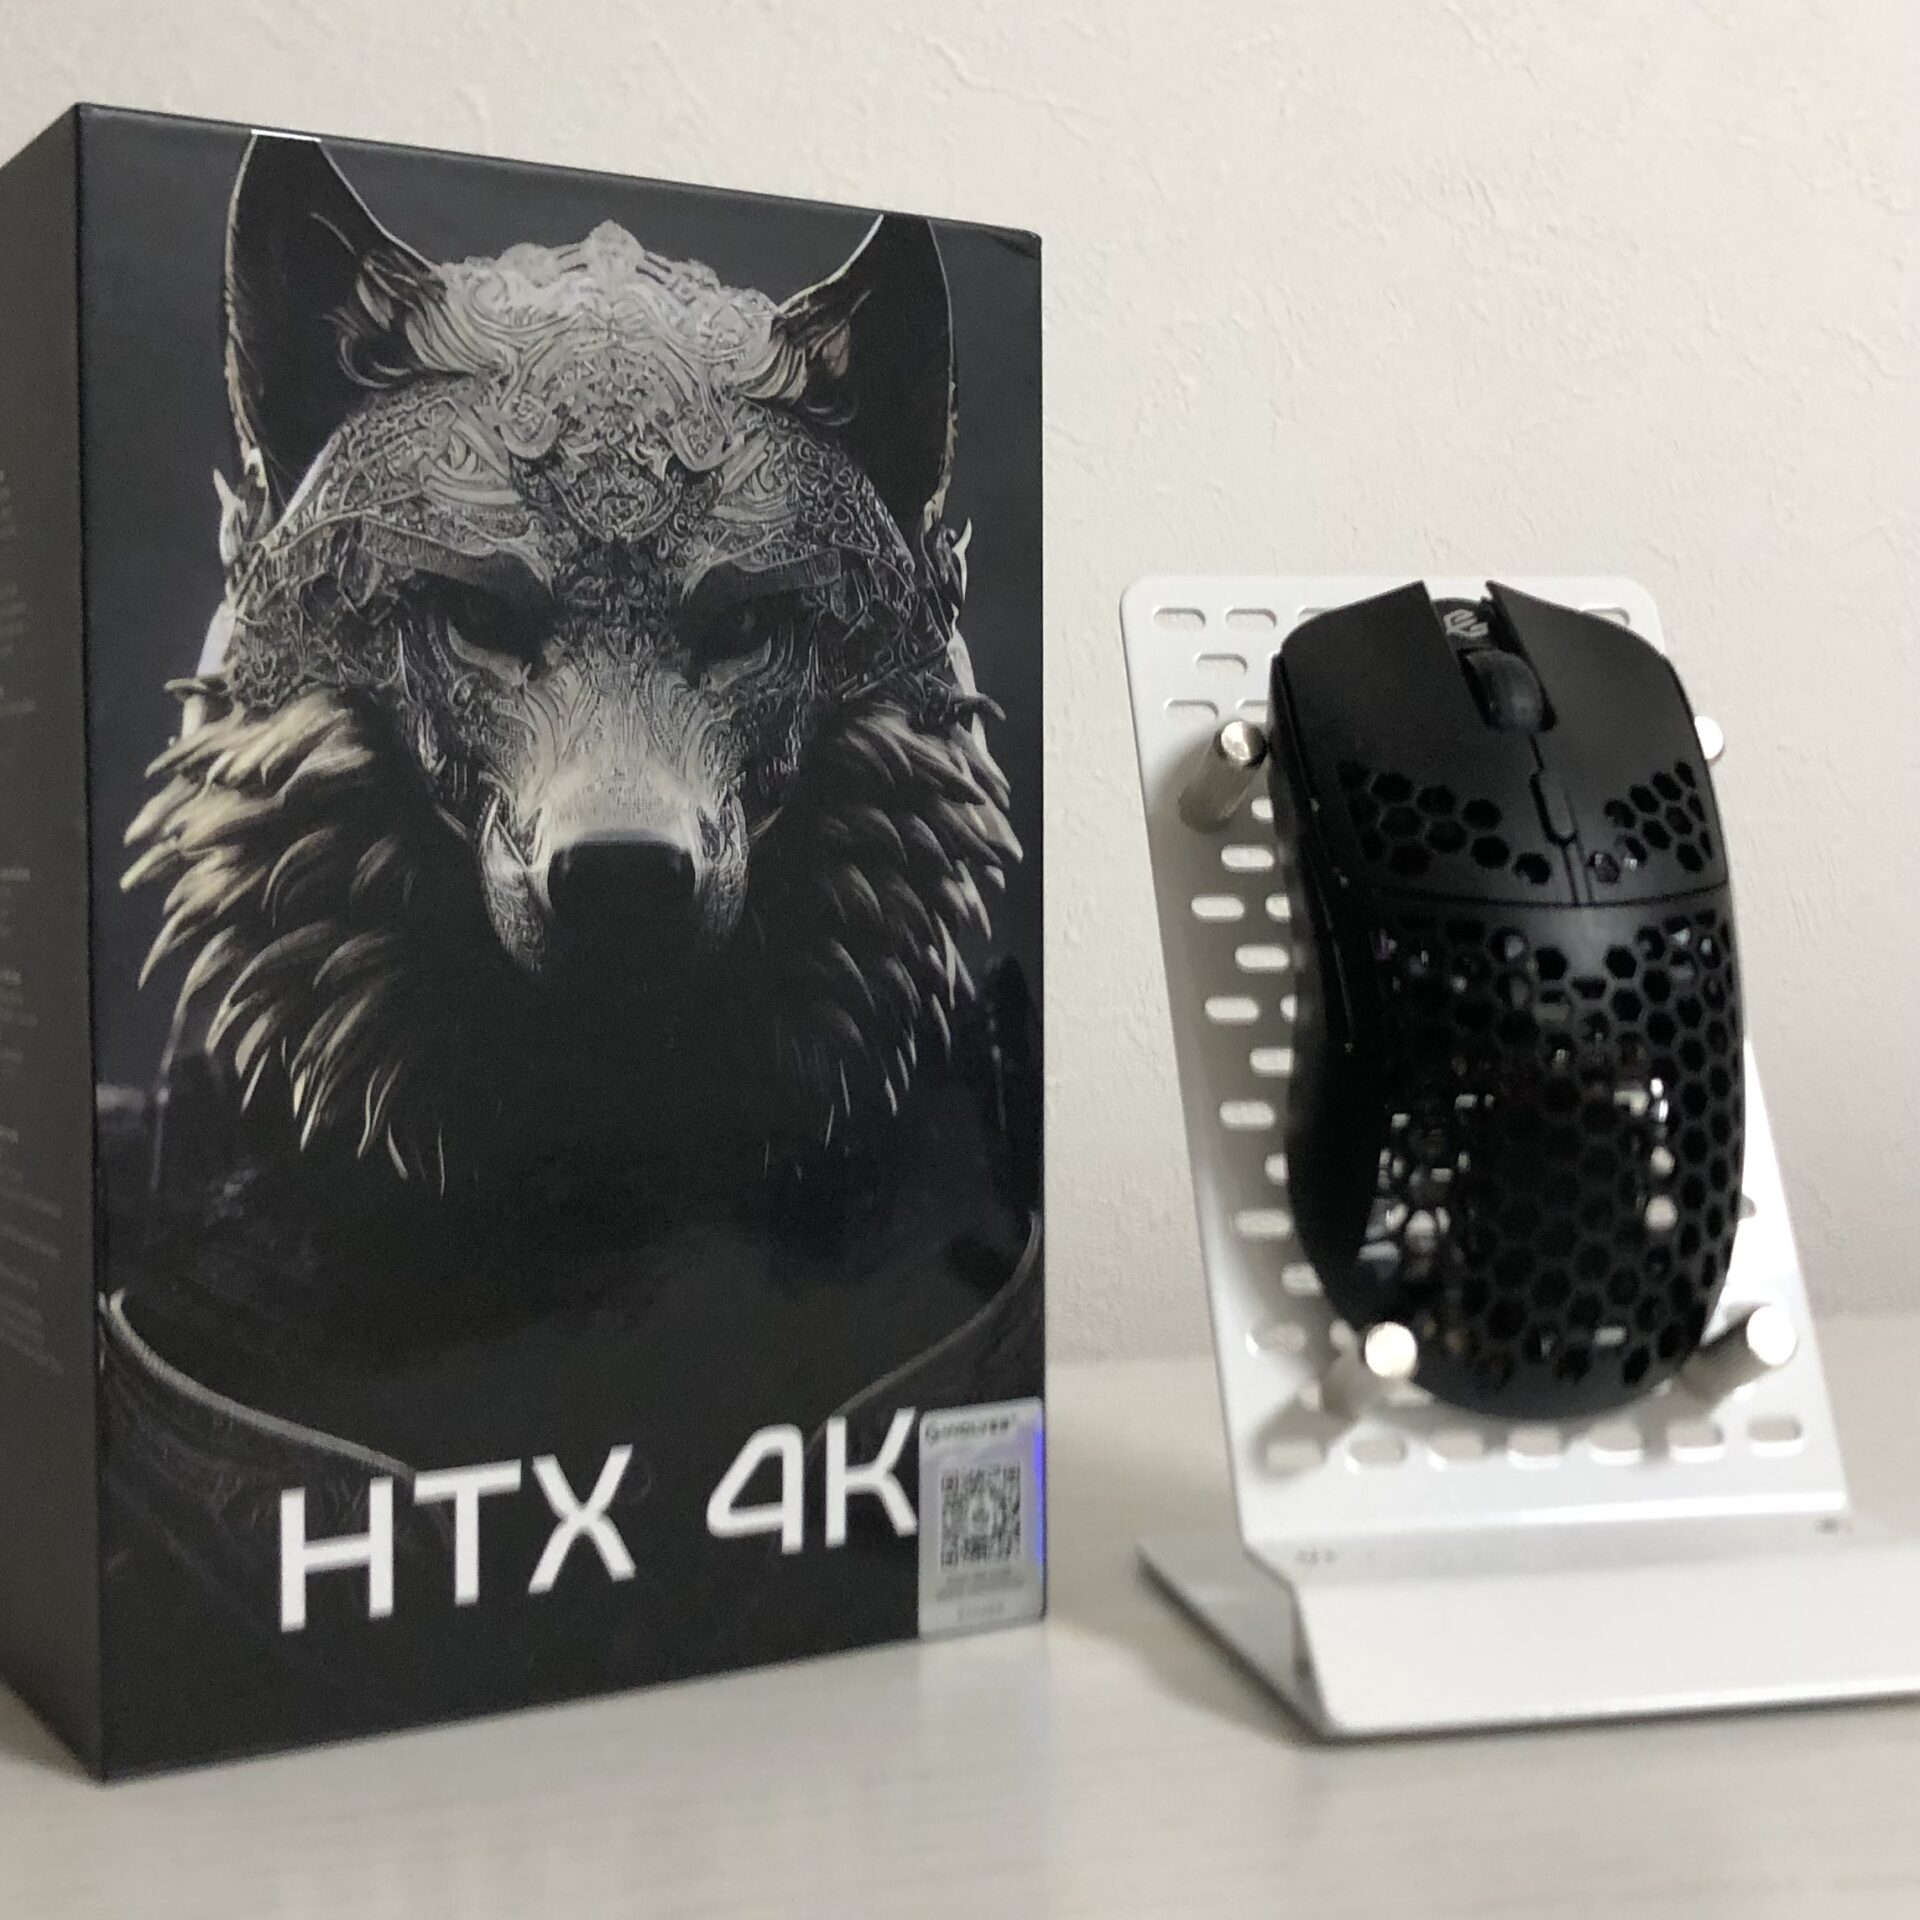 G-wolves htx 4k付属品は画像の通りです